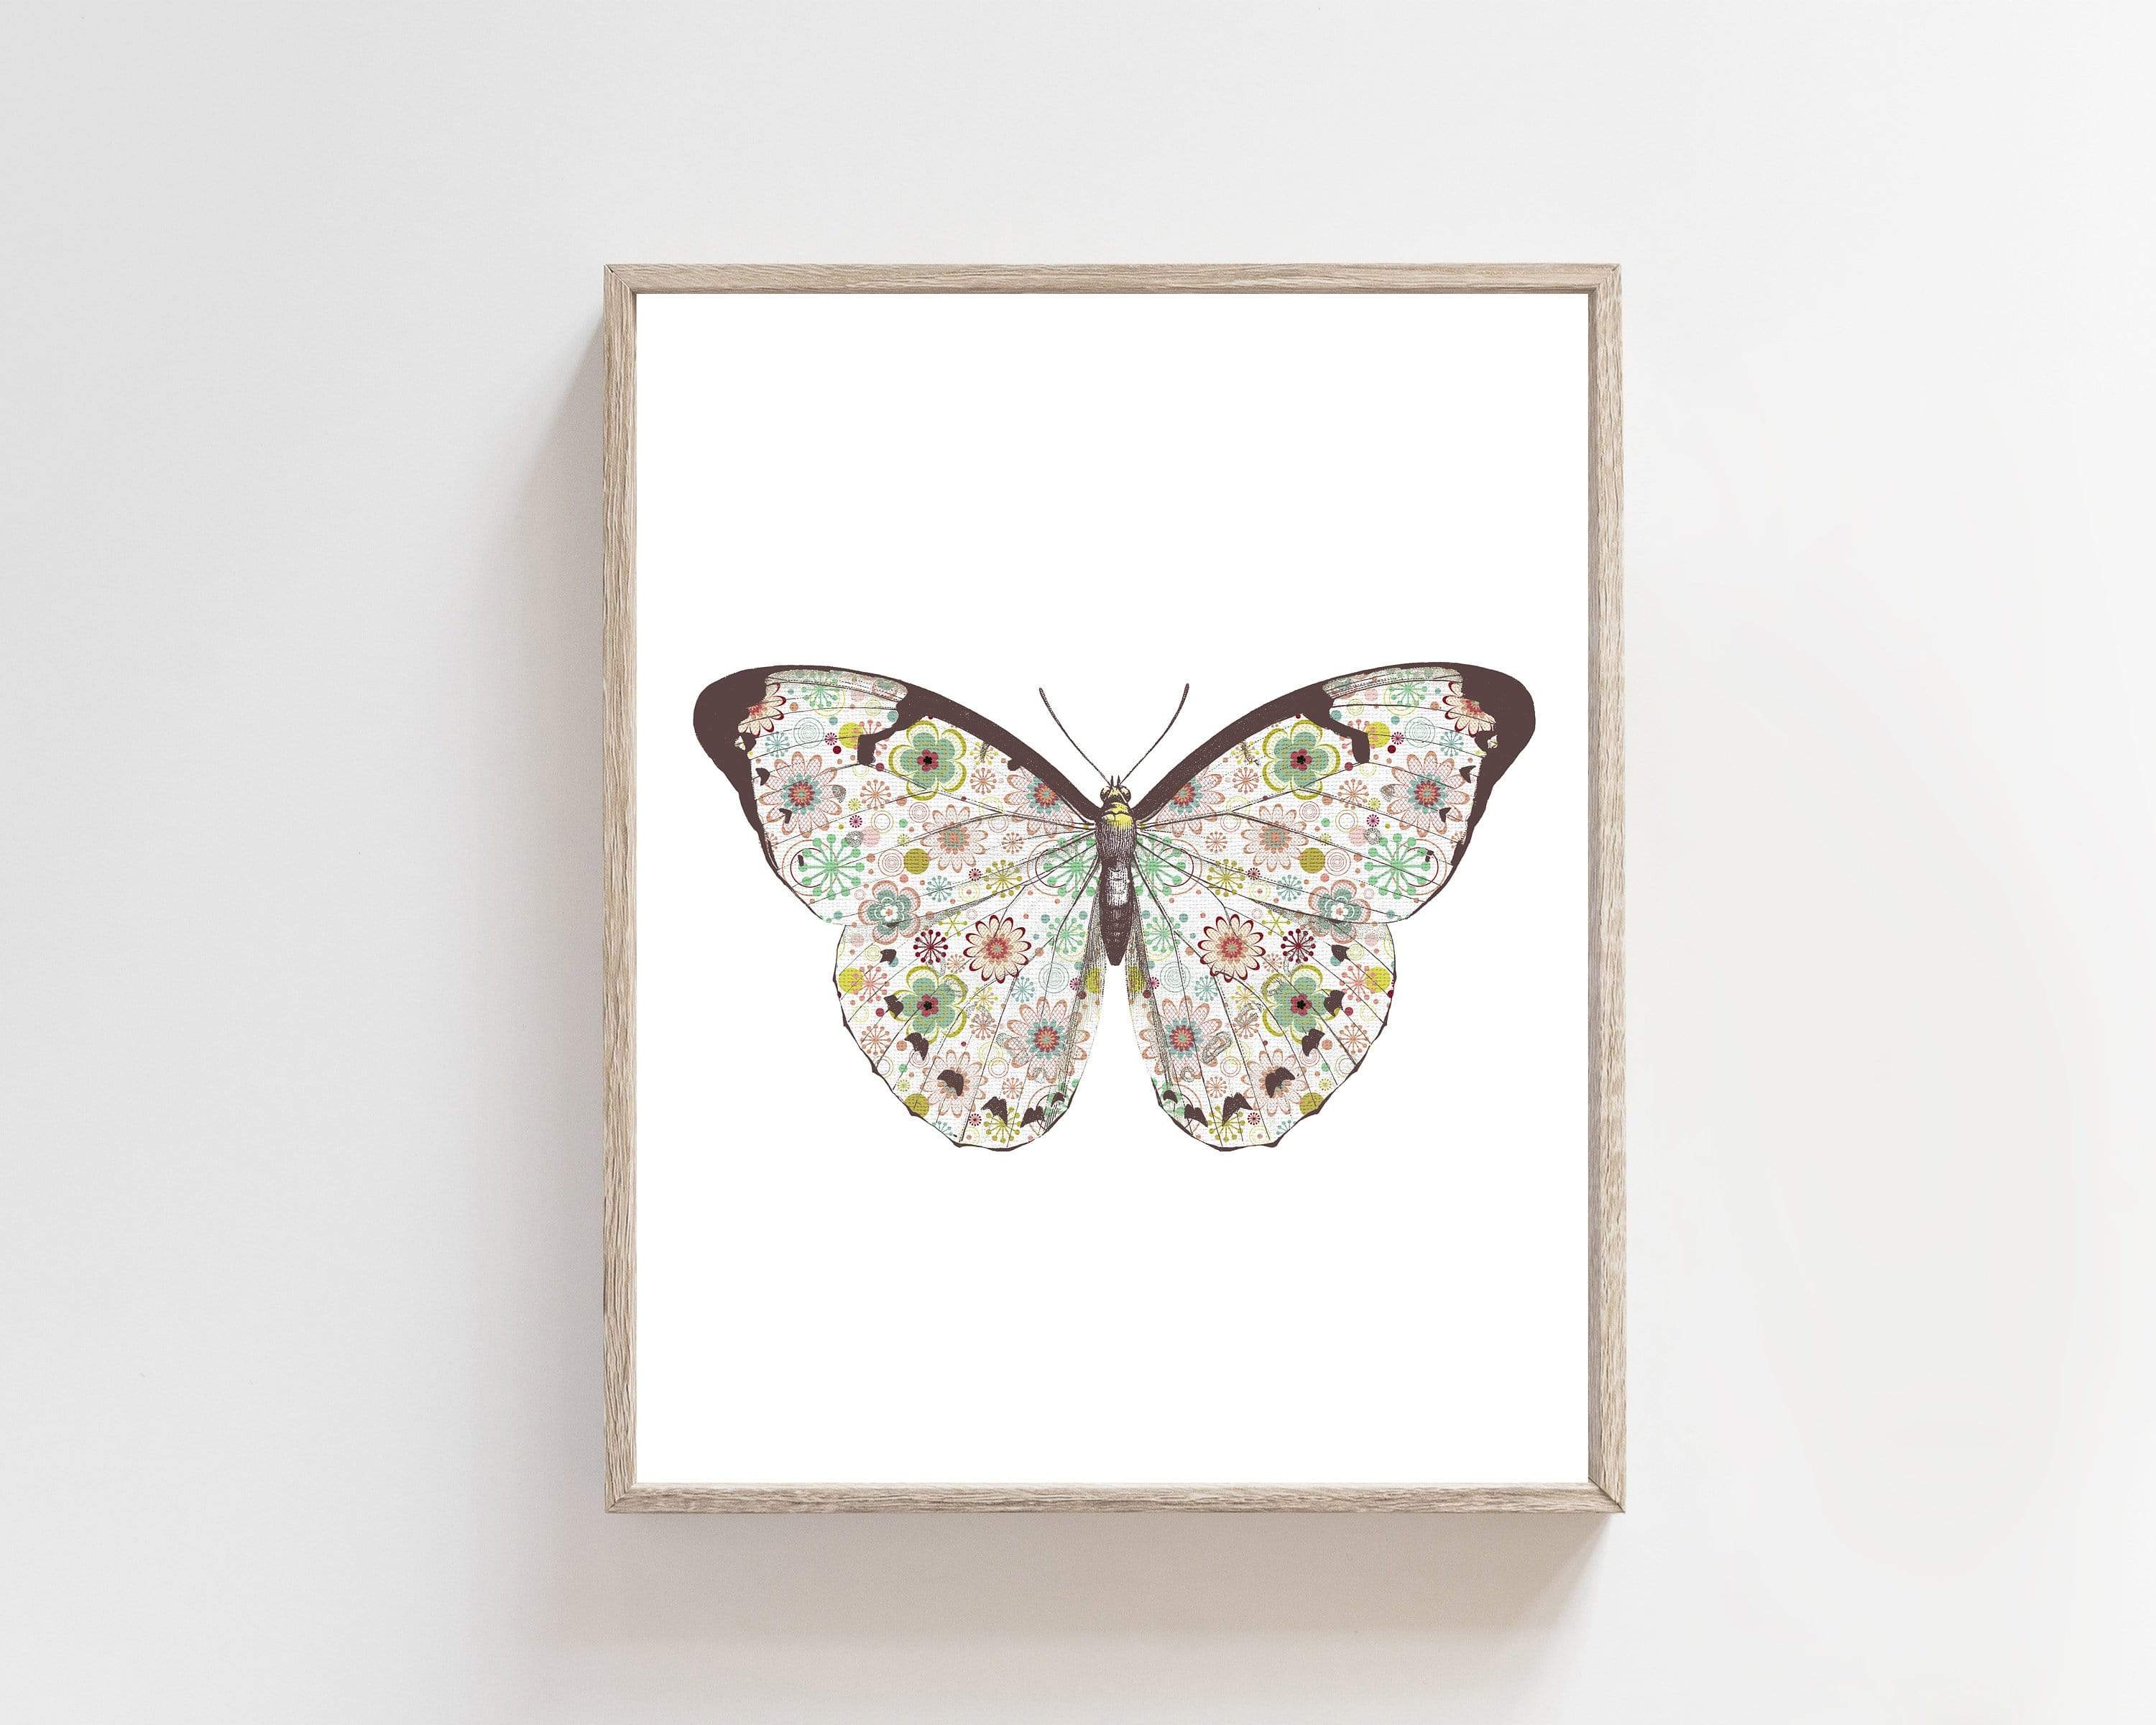 Butterfly wall art - Butterfly printable - Floral Butterfly - Pink Butterfly print - Girls room print - Butterfly print - Butterfly poster nursery art print baby nursery bedroom decor